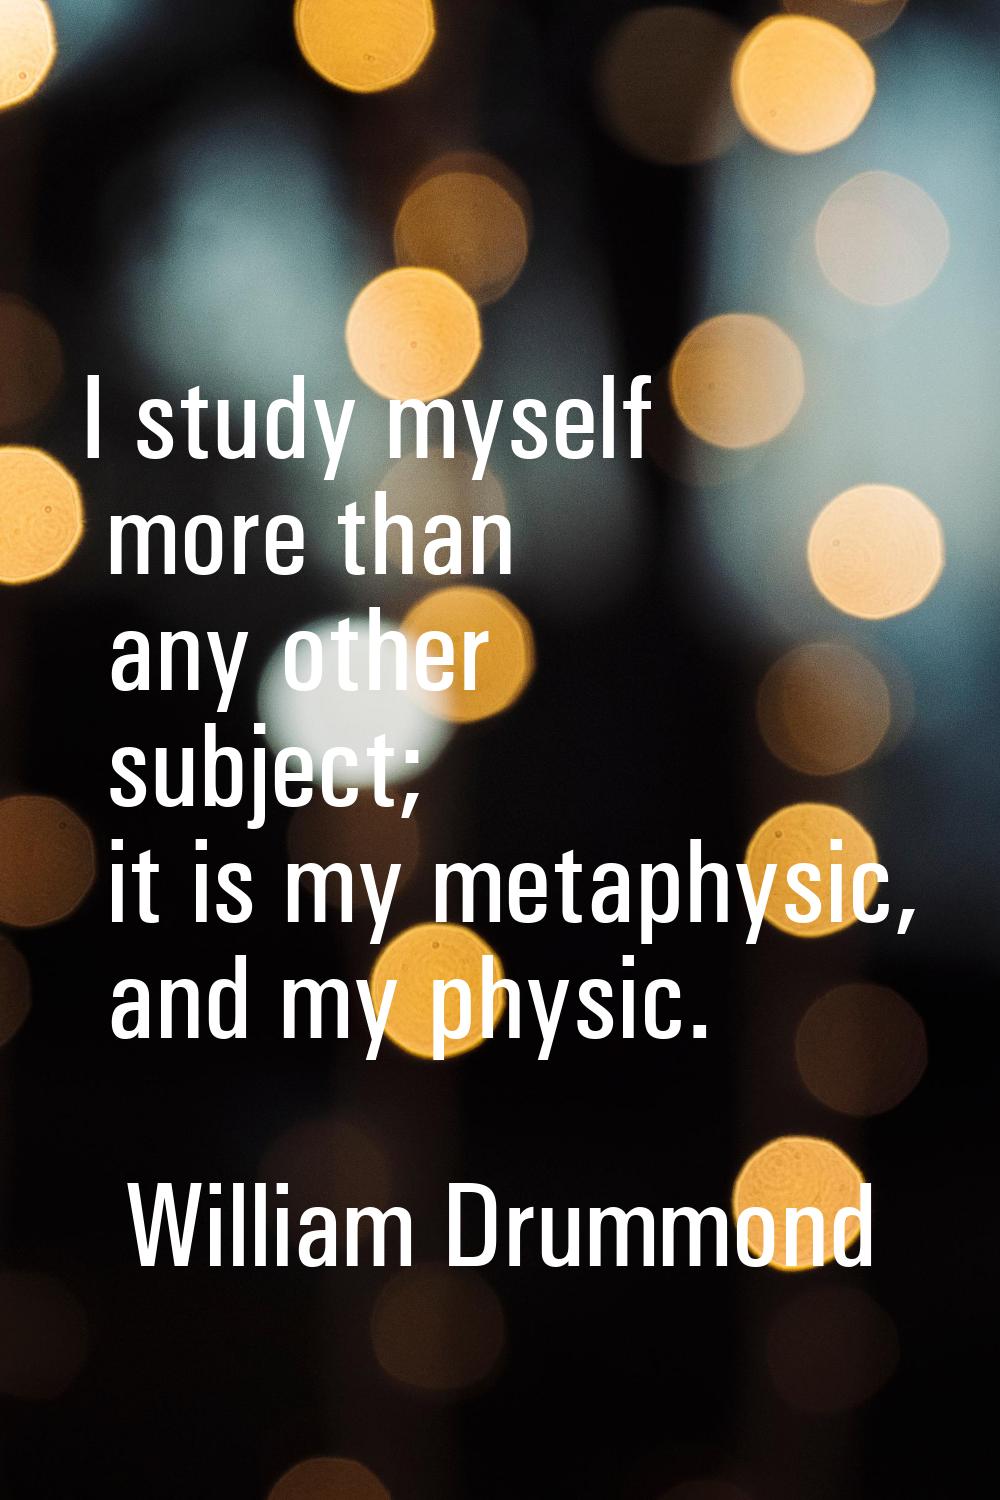 I study myself more than any other subject; it is my metaphysic, and my physic.